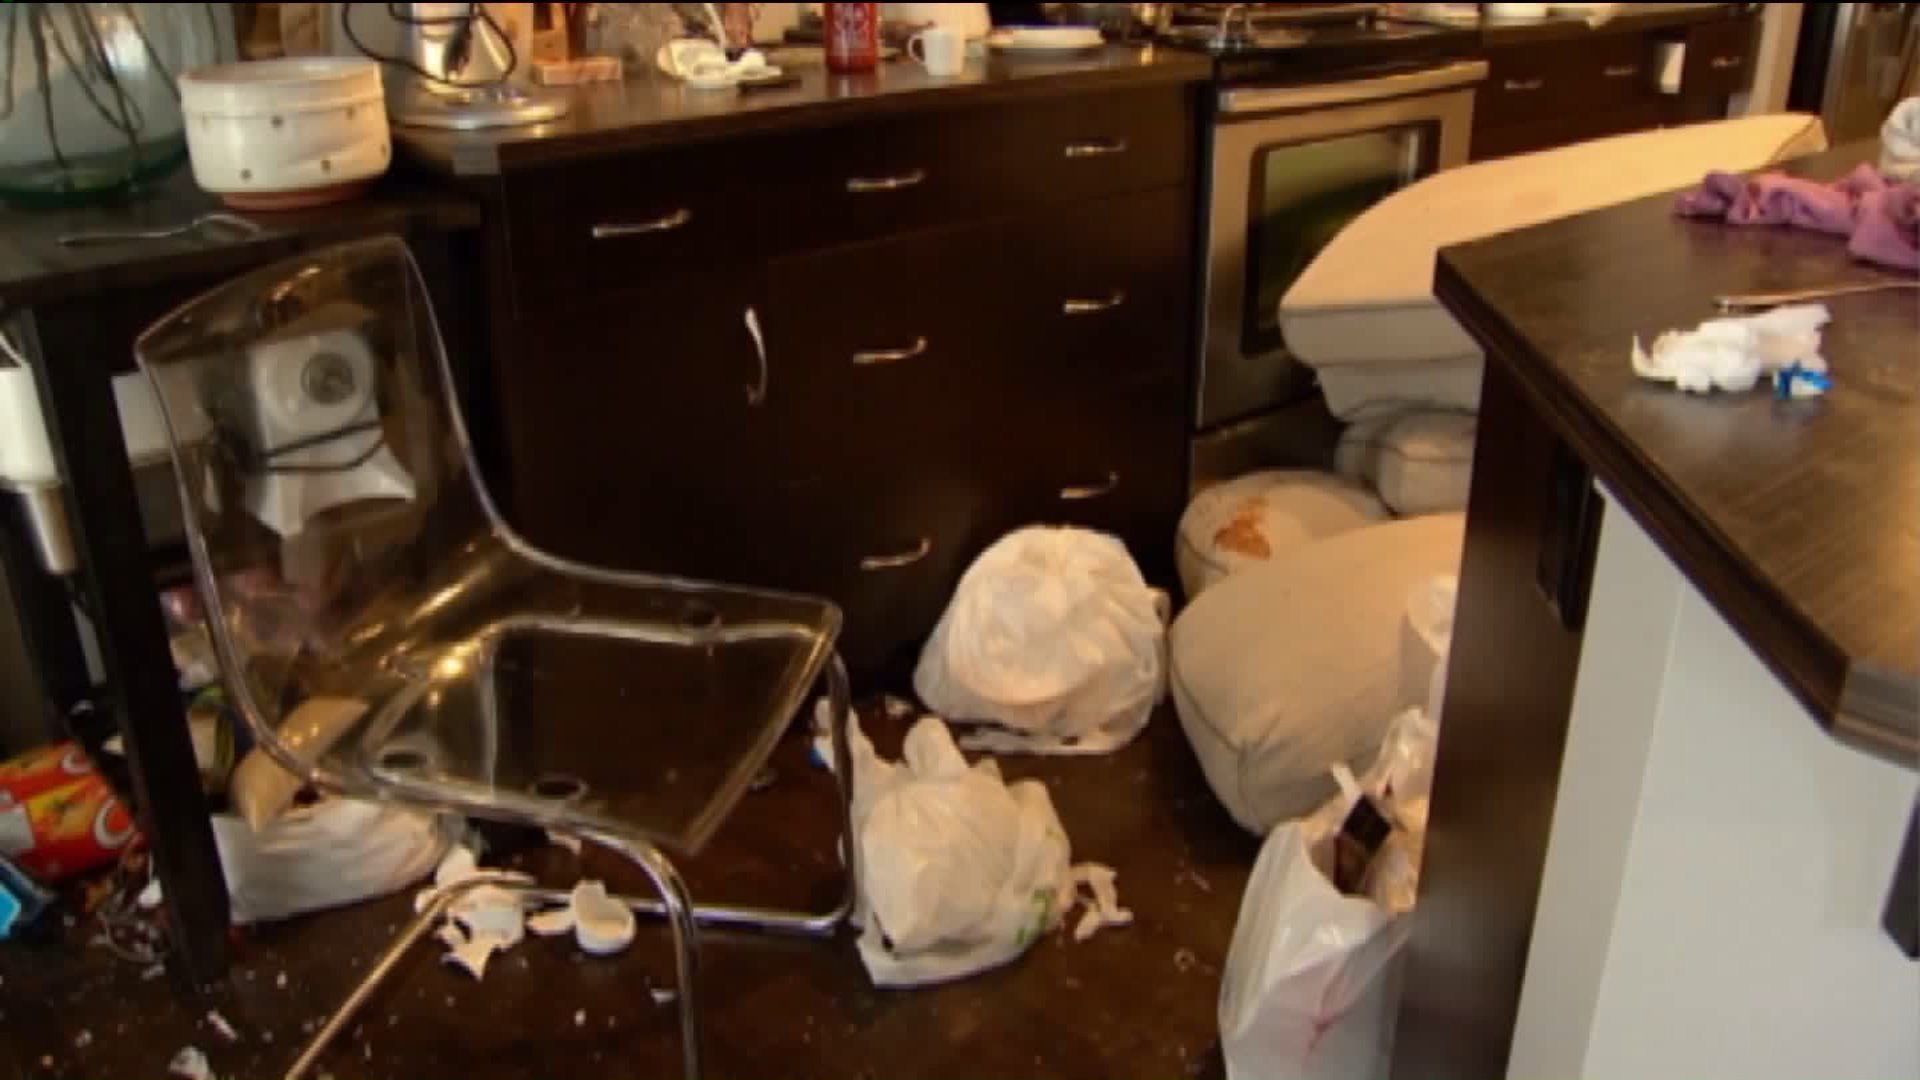 ct-airbnb-owners-find-house-in-disarray-20150430